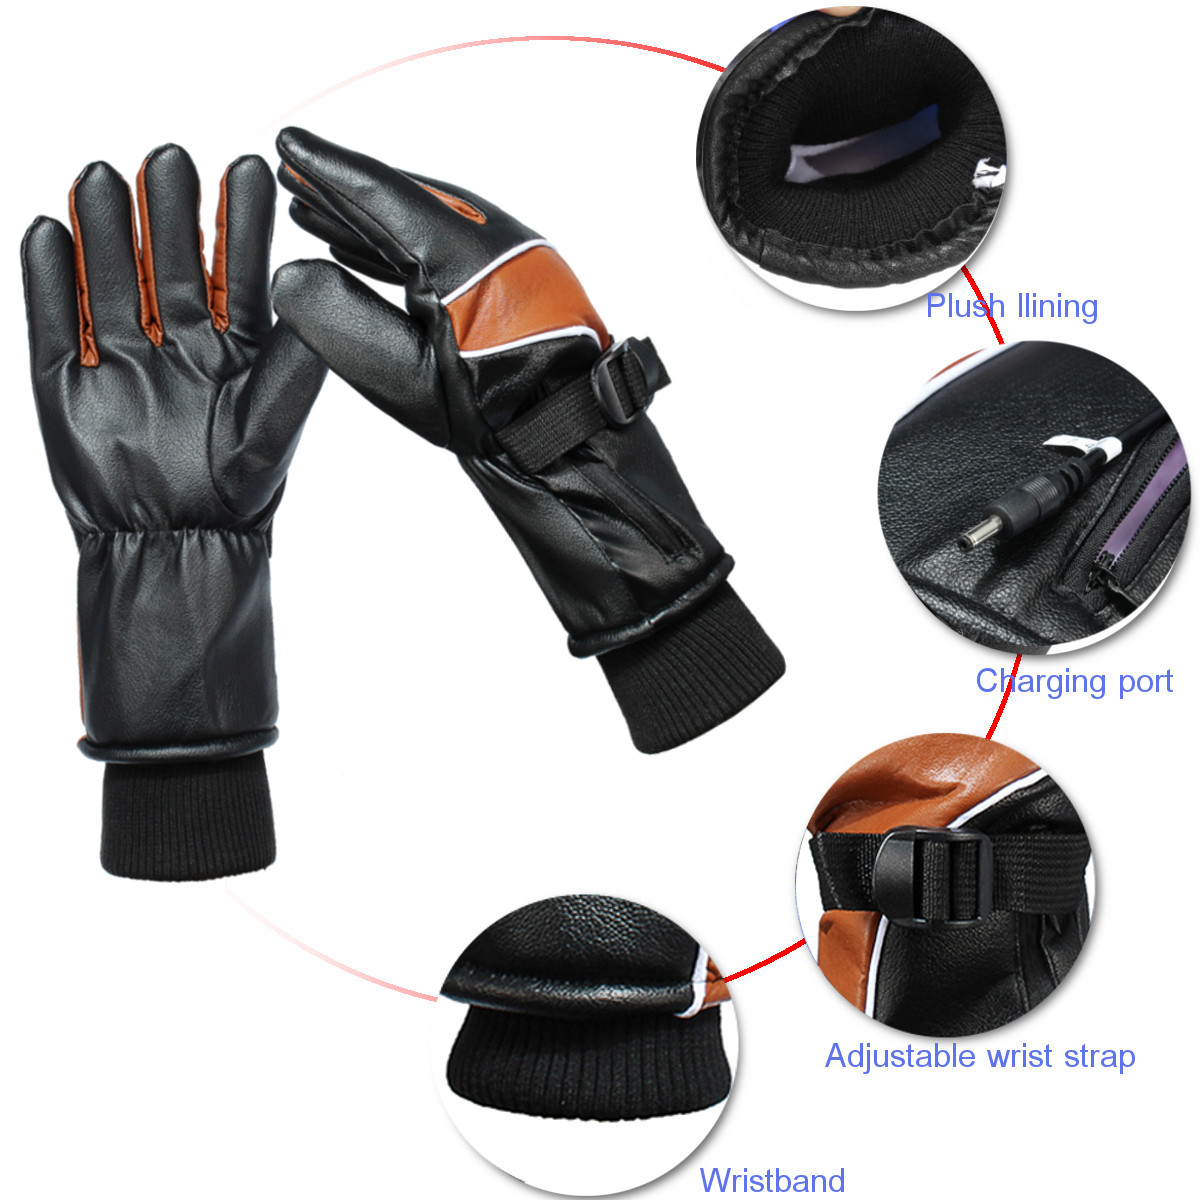 2600mAh-PU-Touch-Screen-Rechargeable-Battery-Power-Electric-Heated-Hand-Winter-Warmer-Motorcycle-Glo-1355180